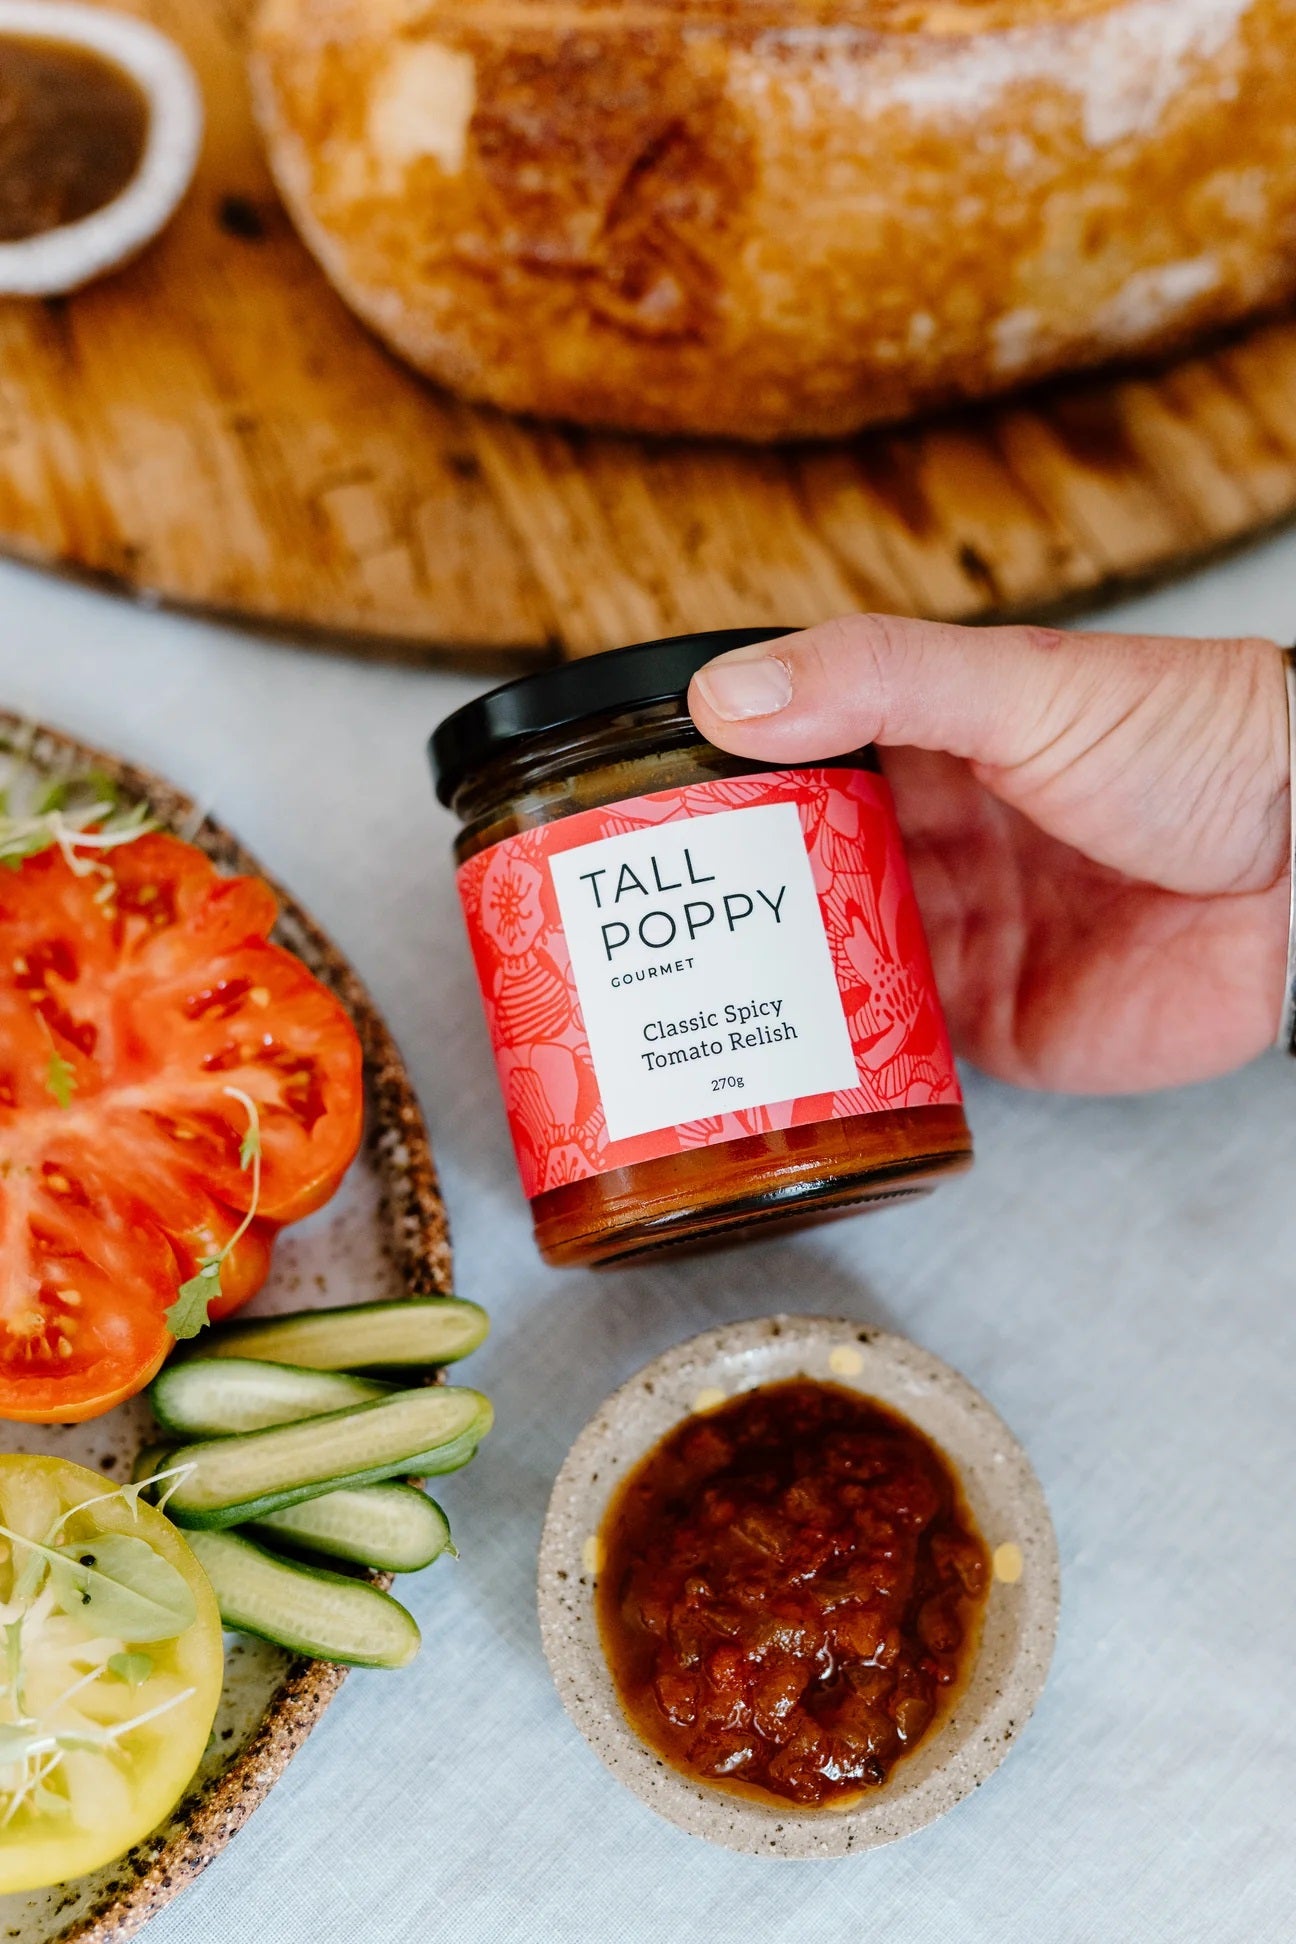 tomato relish,spicy relish, tall poppy gourmet, the conron store, grenfell nsw